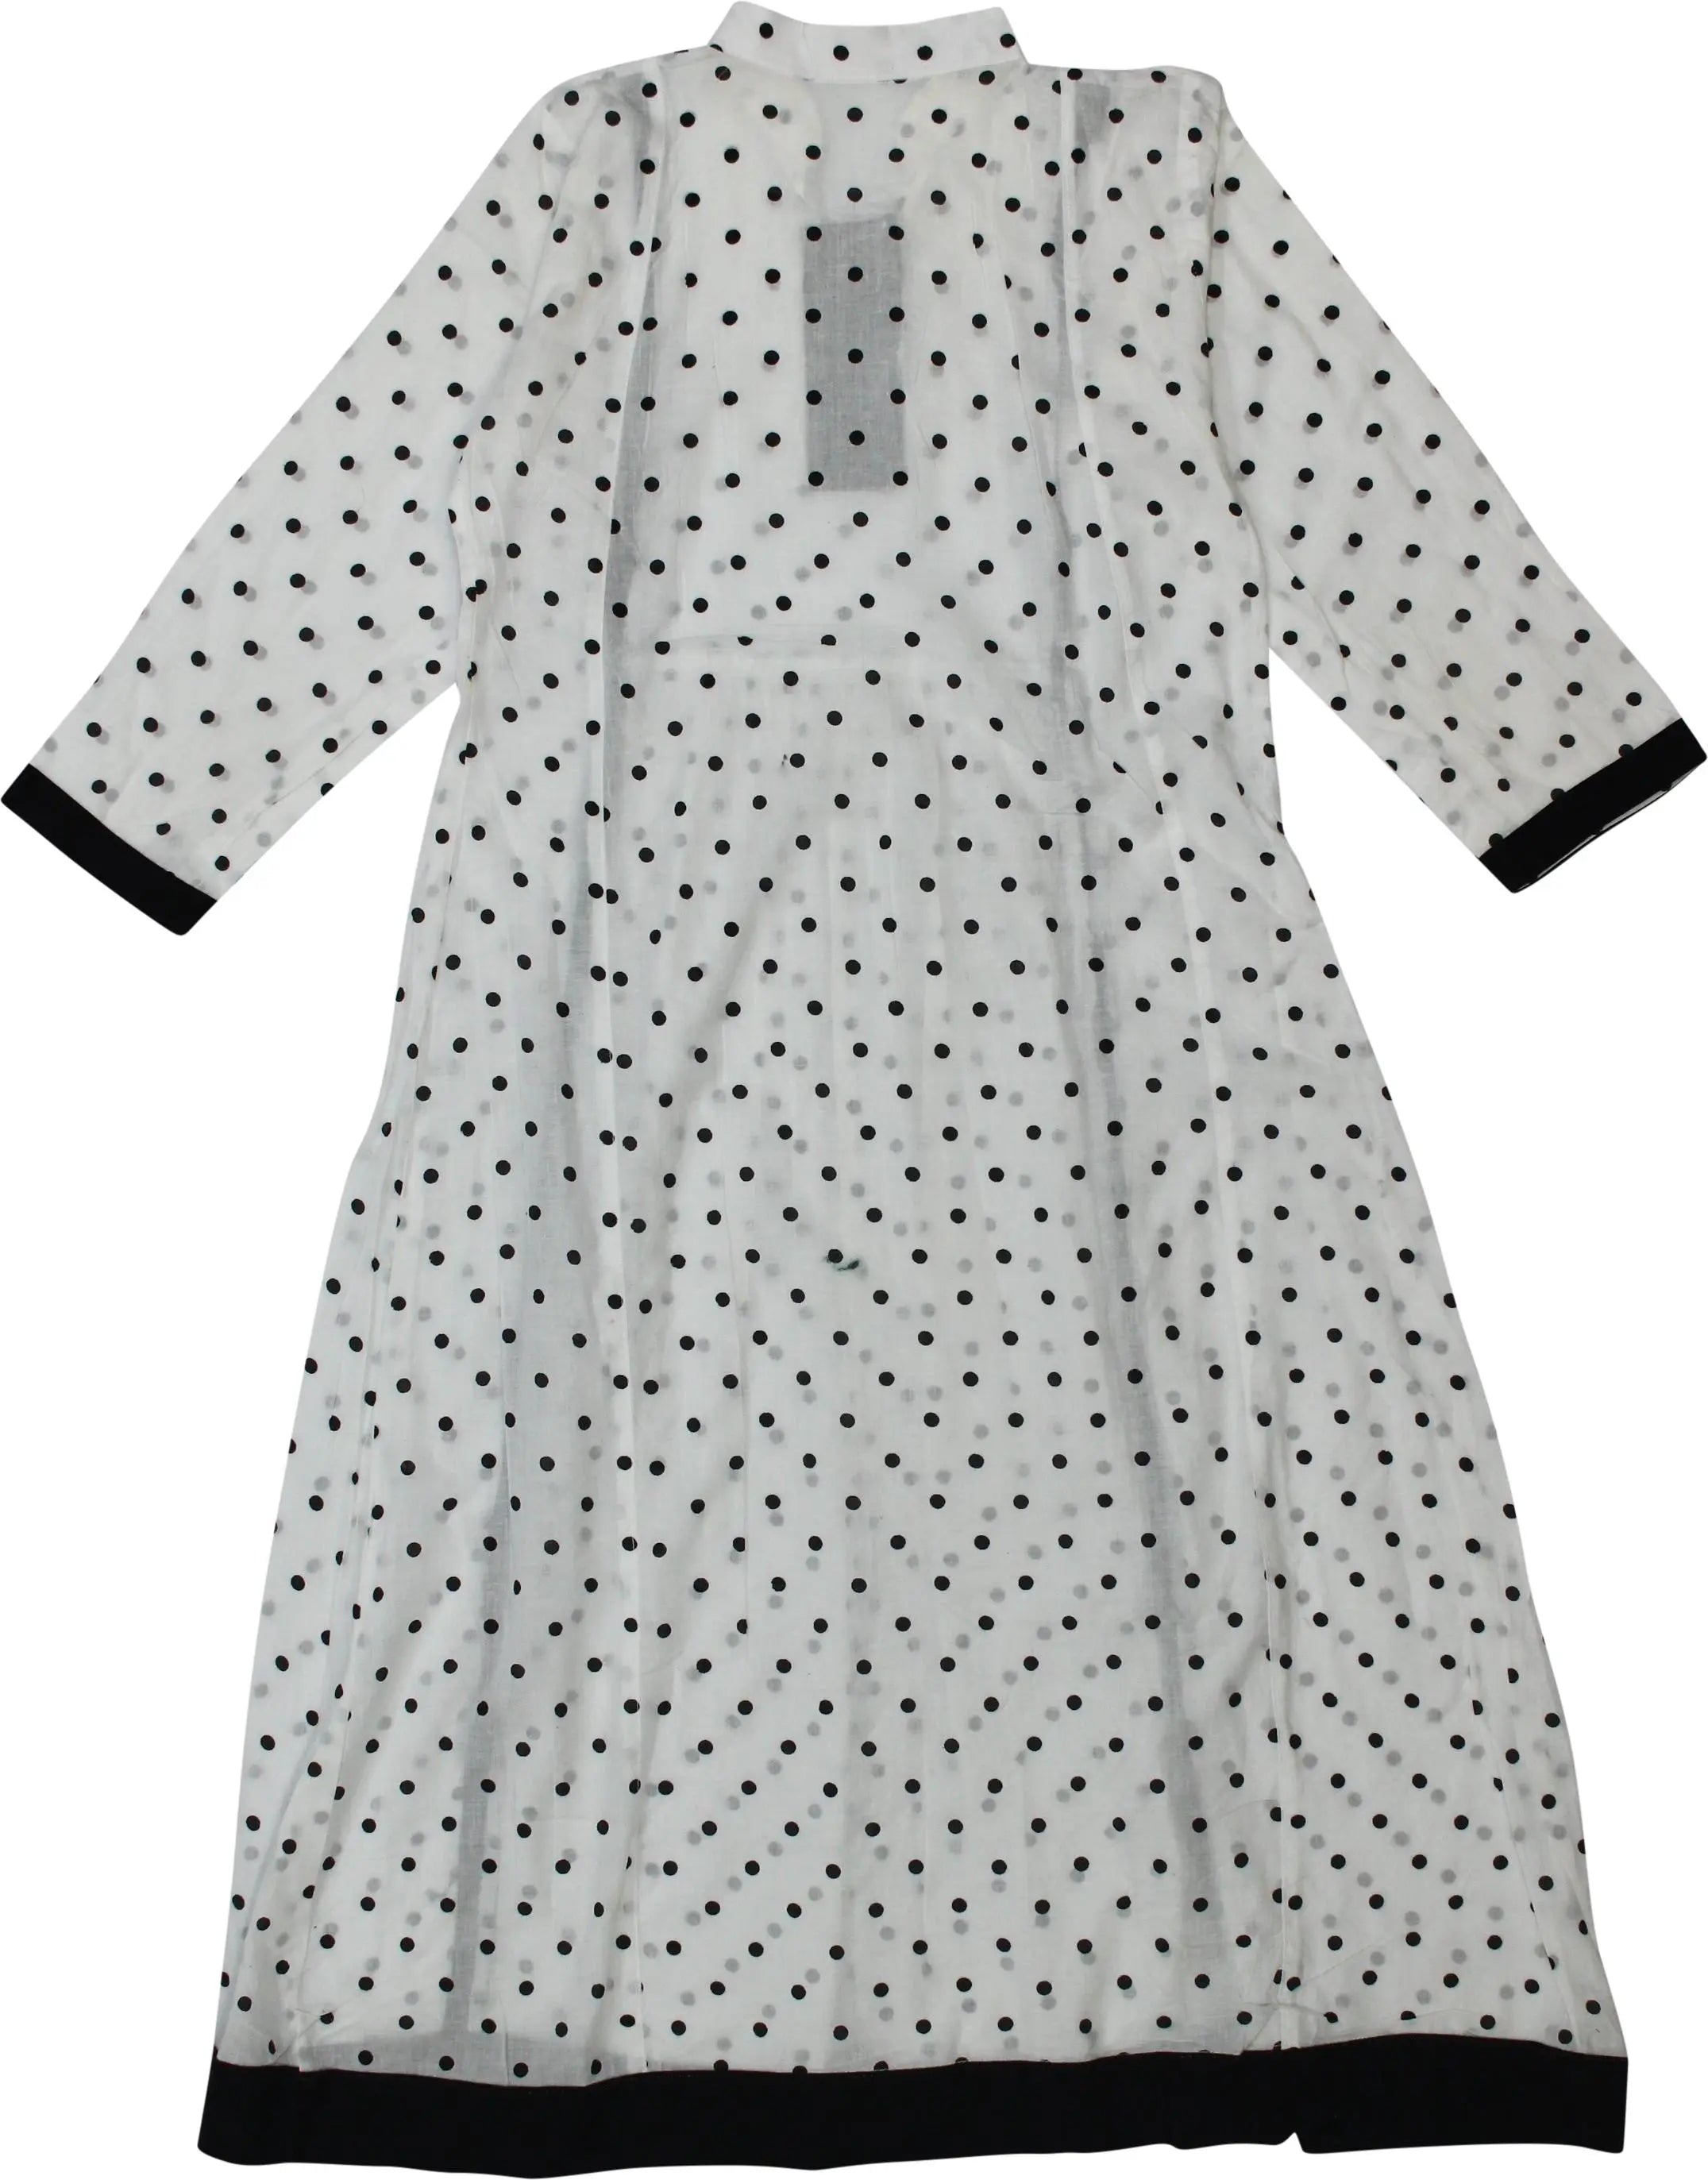 Handmade - White Polkadot Dress- ThriftTale.com - Vintage and second handclothing